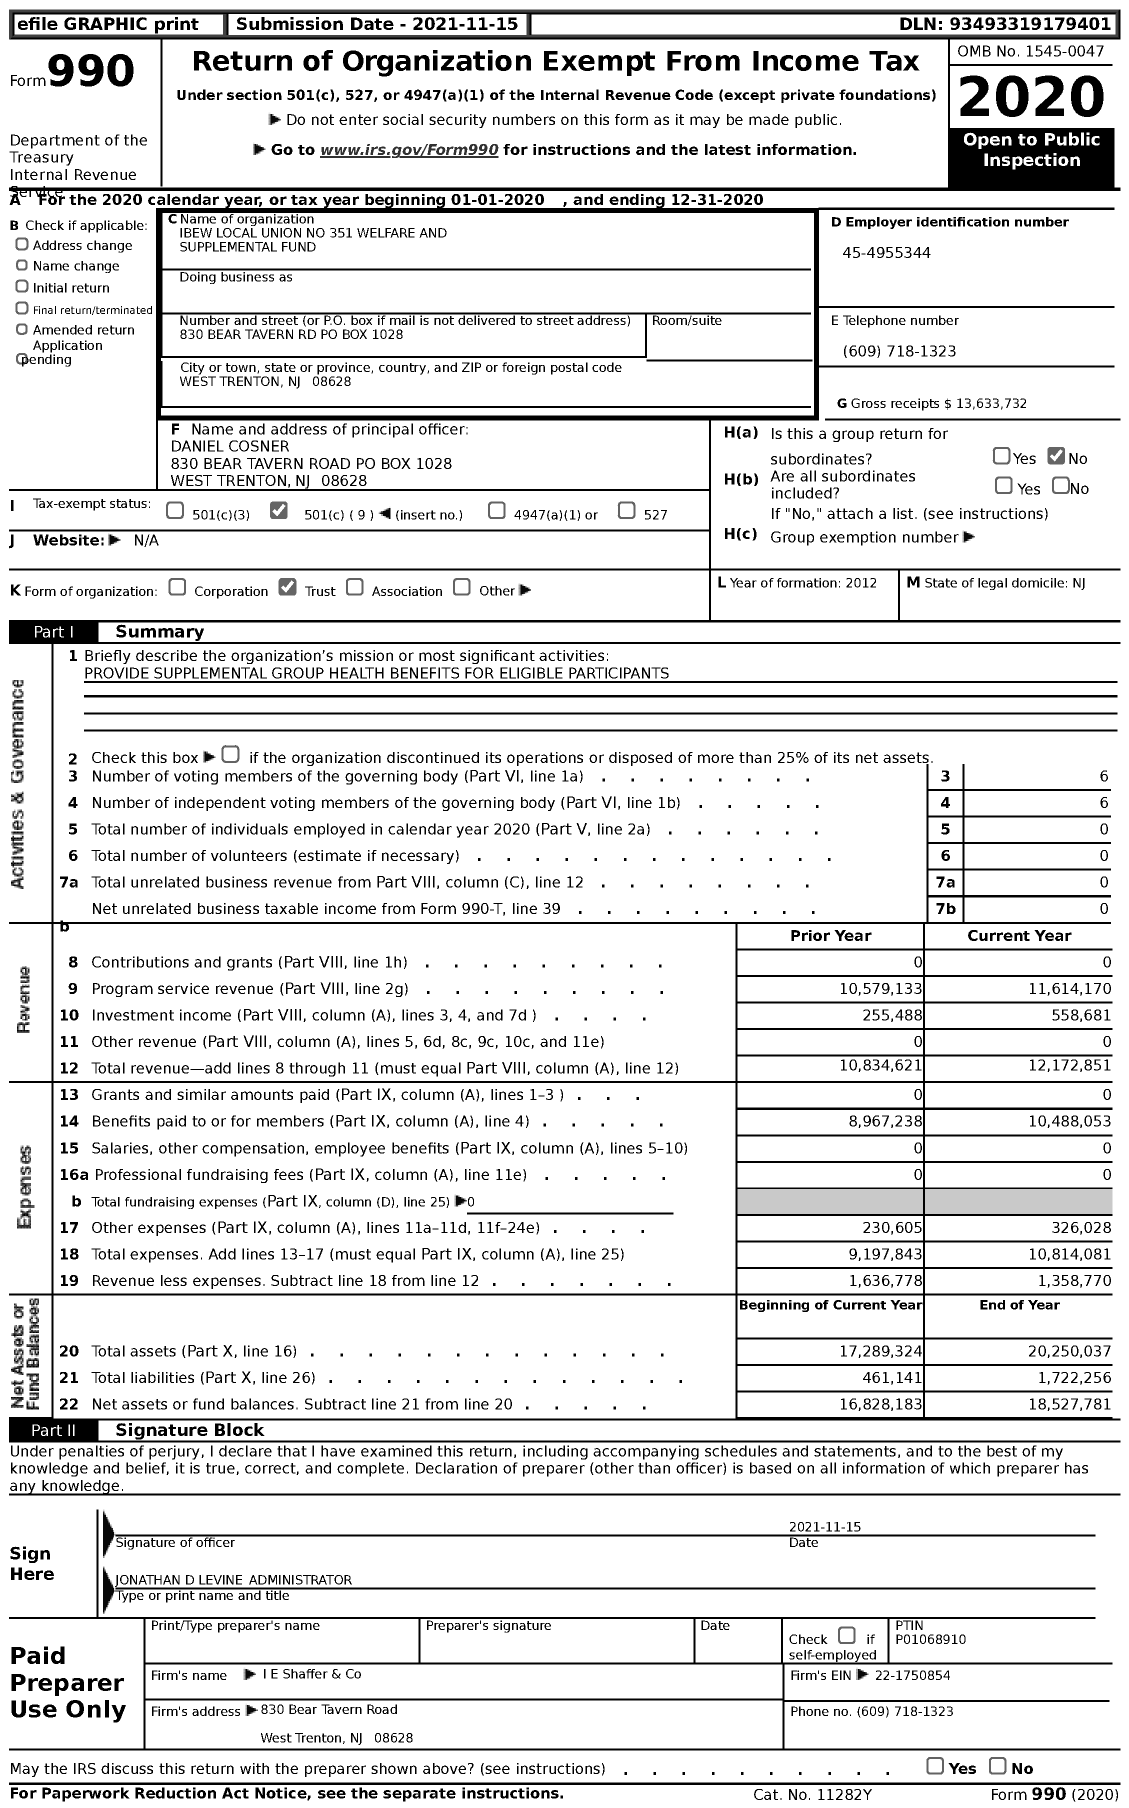 Image of first page of 2020 Form 990 for IBEW Local Union No 351 Welfare and Supplemental Fund